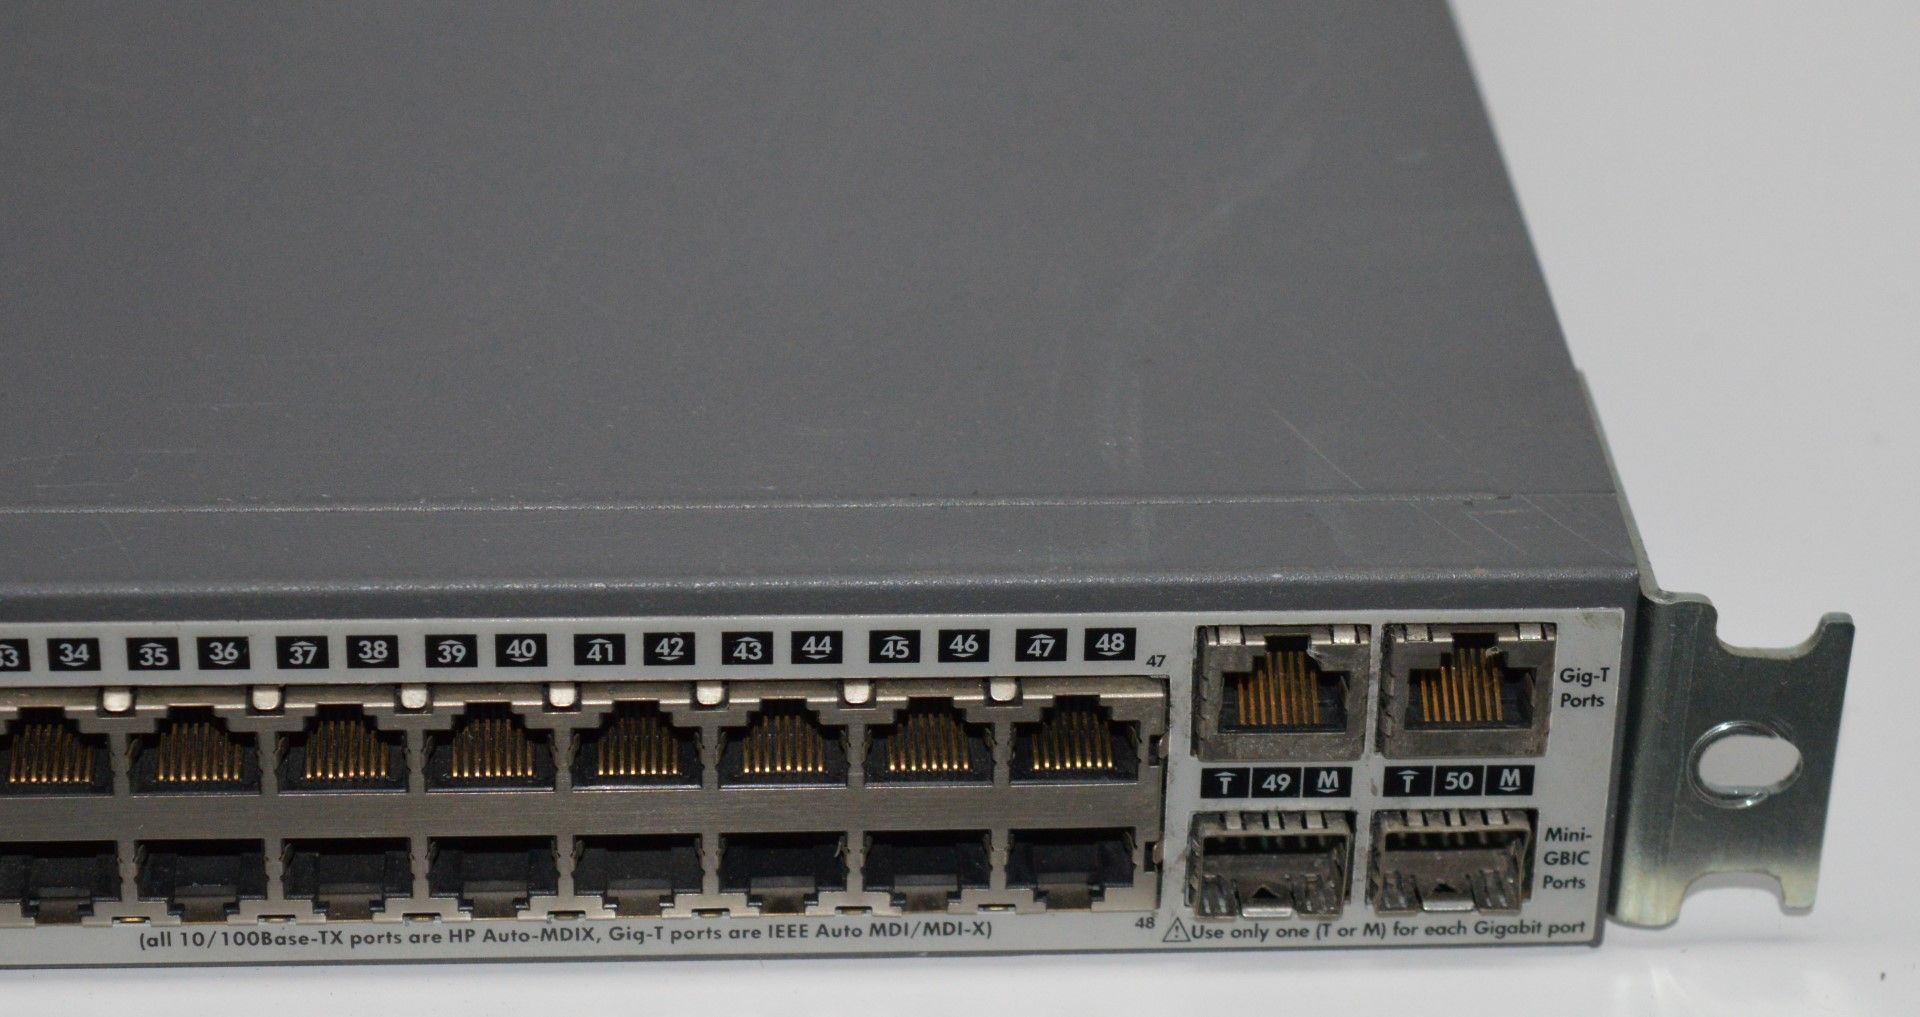 1 x Hewlett Packard Procurve 2650 24-port Fast Ethernet Network Switch - CL159 - Ref PC024 - - Image 4 of 5